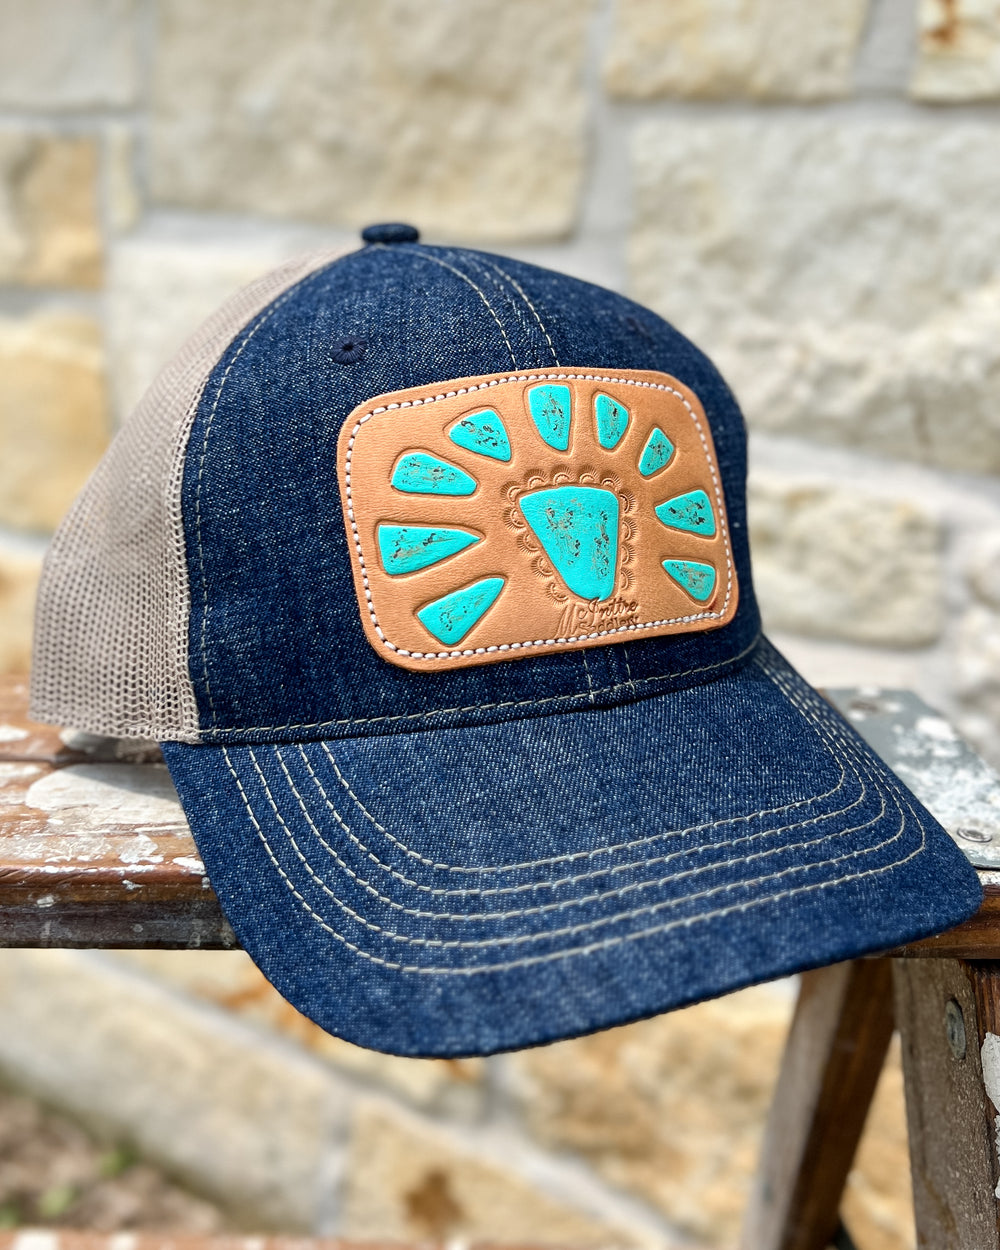 McIntire Saddlery Denim Cap with Turquoise Squash Blossom Leather Patch